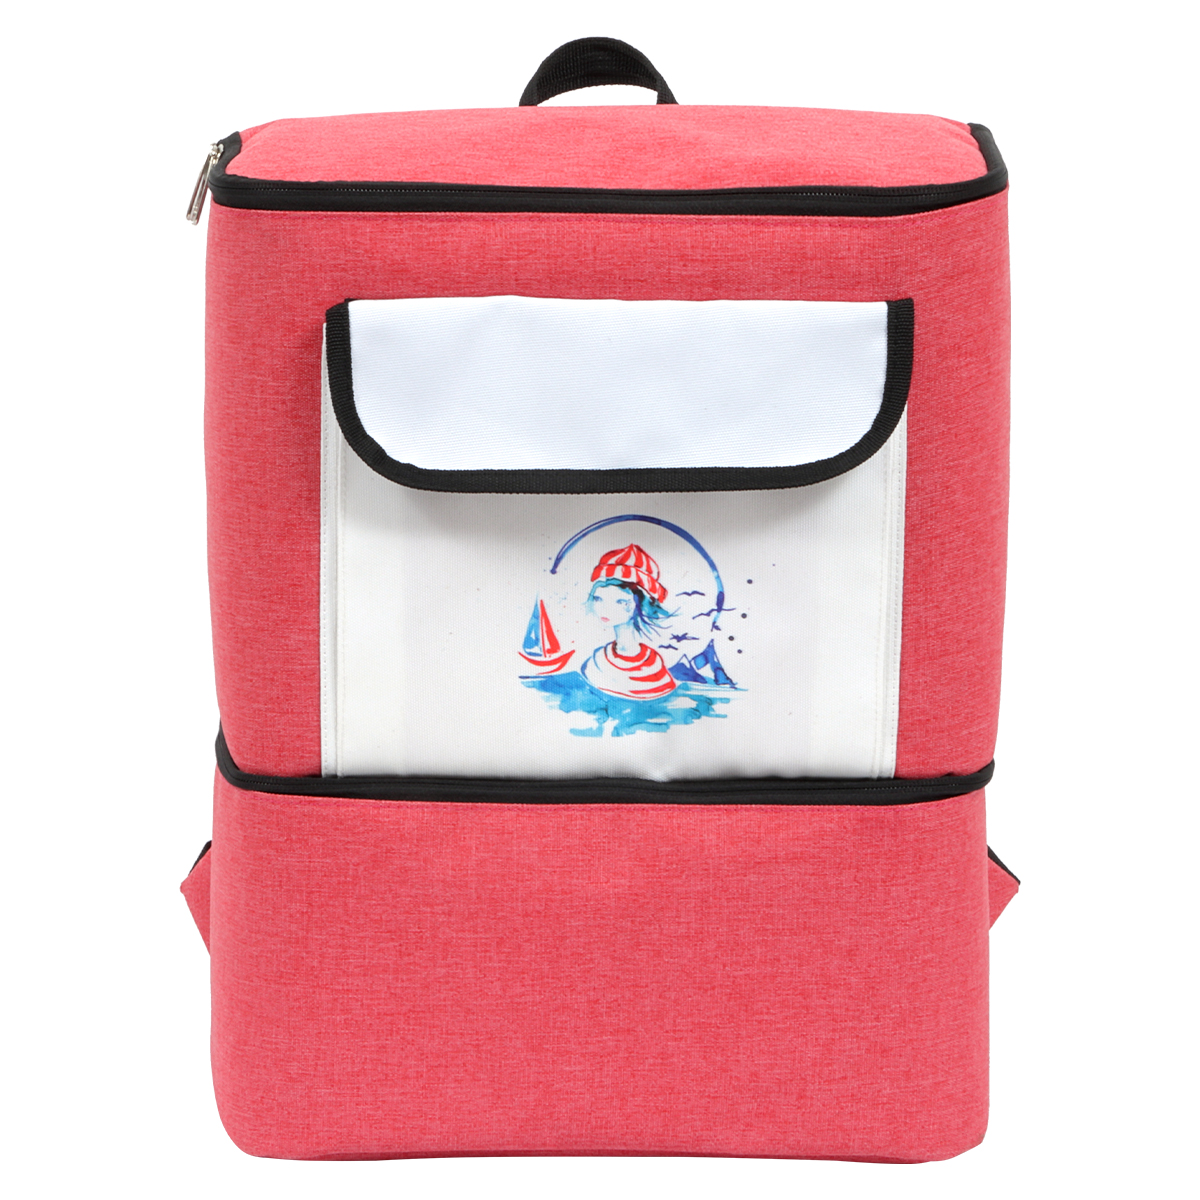 Anemoss sailor girl insulated backpack